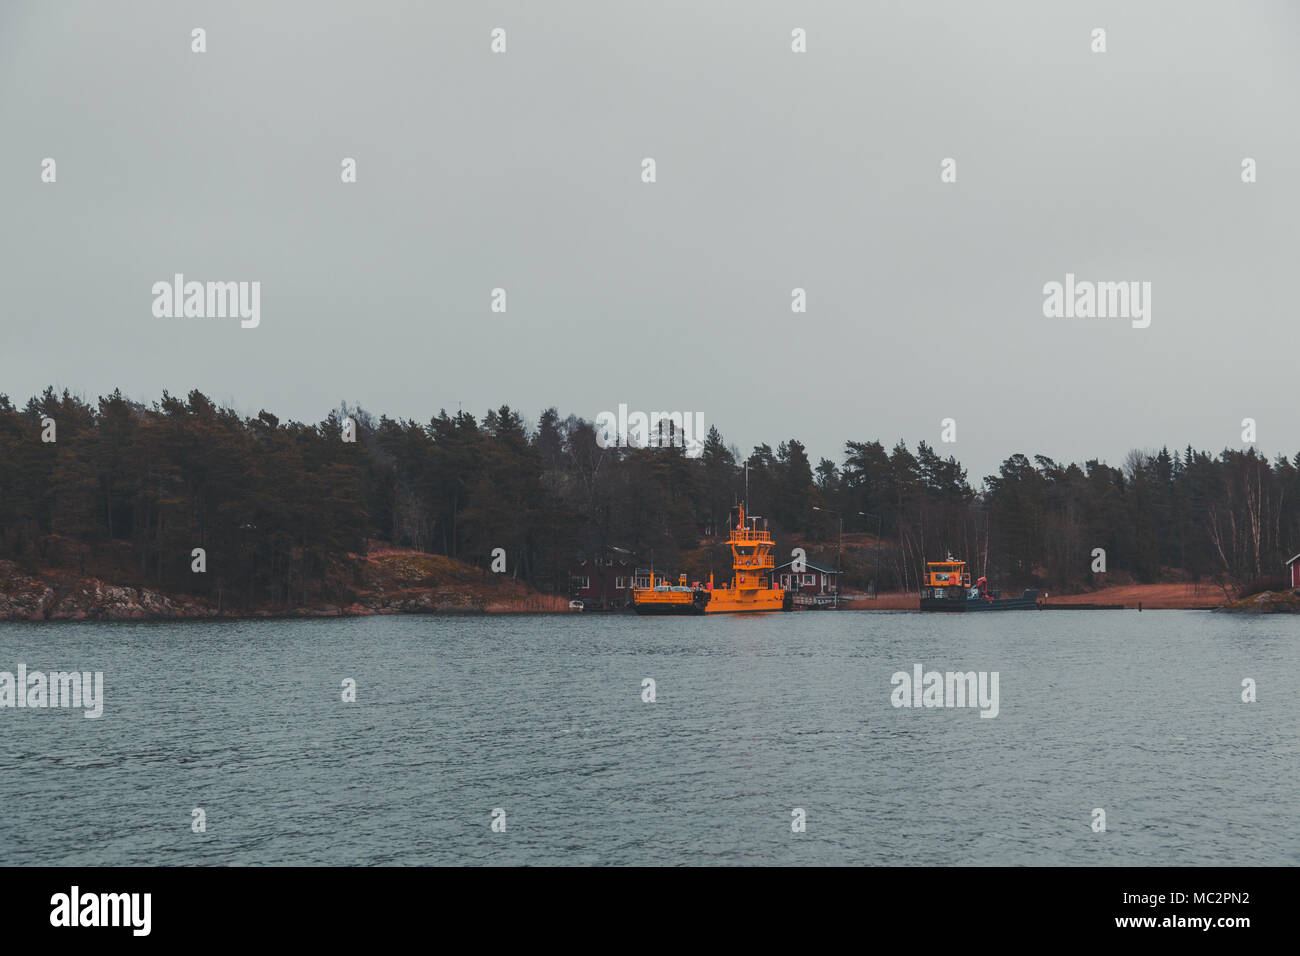 Cable ferry transporting cars over Barosund on an autumn day Stock Photo